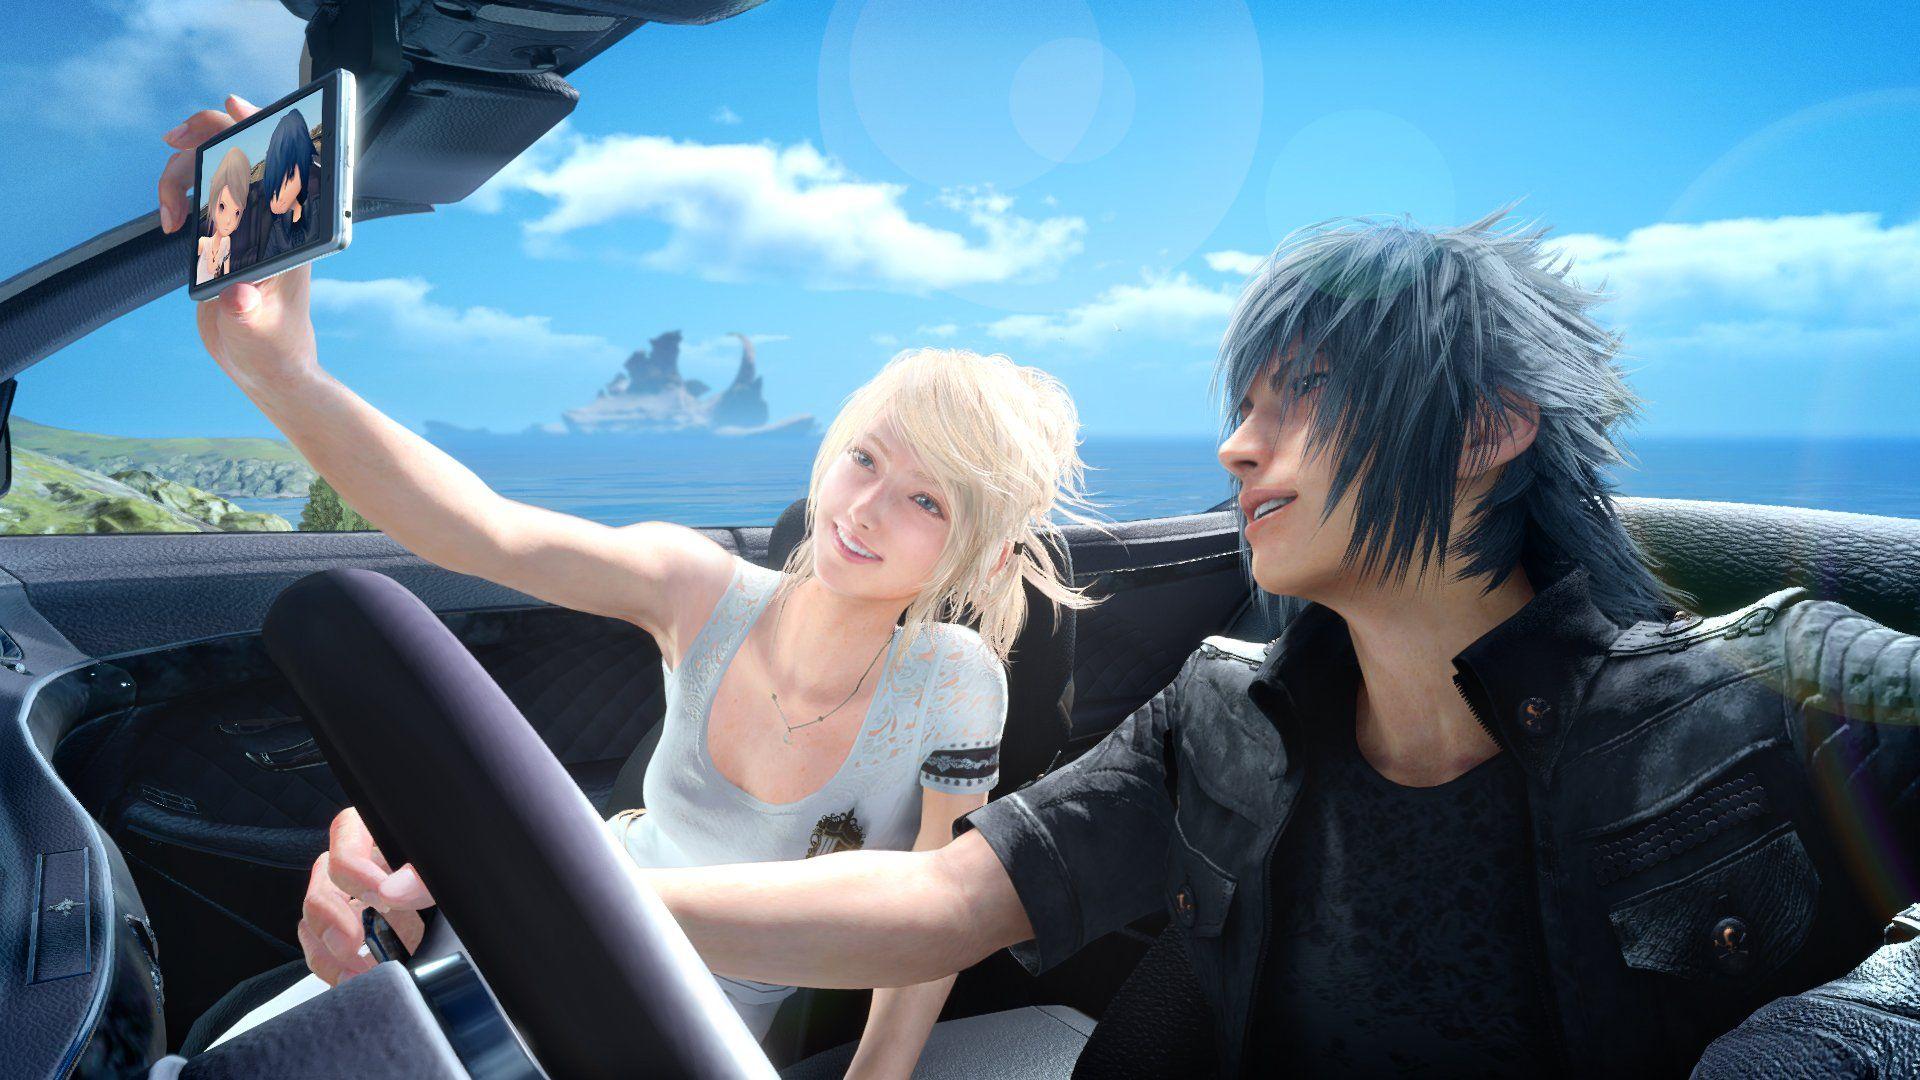 Final Fantasy XV's Special Valentine's Day Pictures are Sweet, Cute